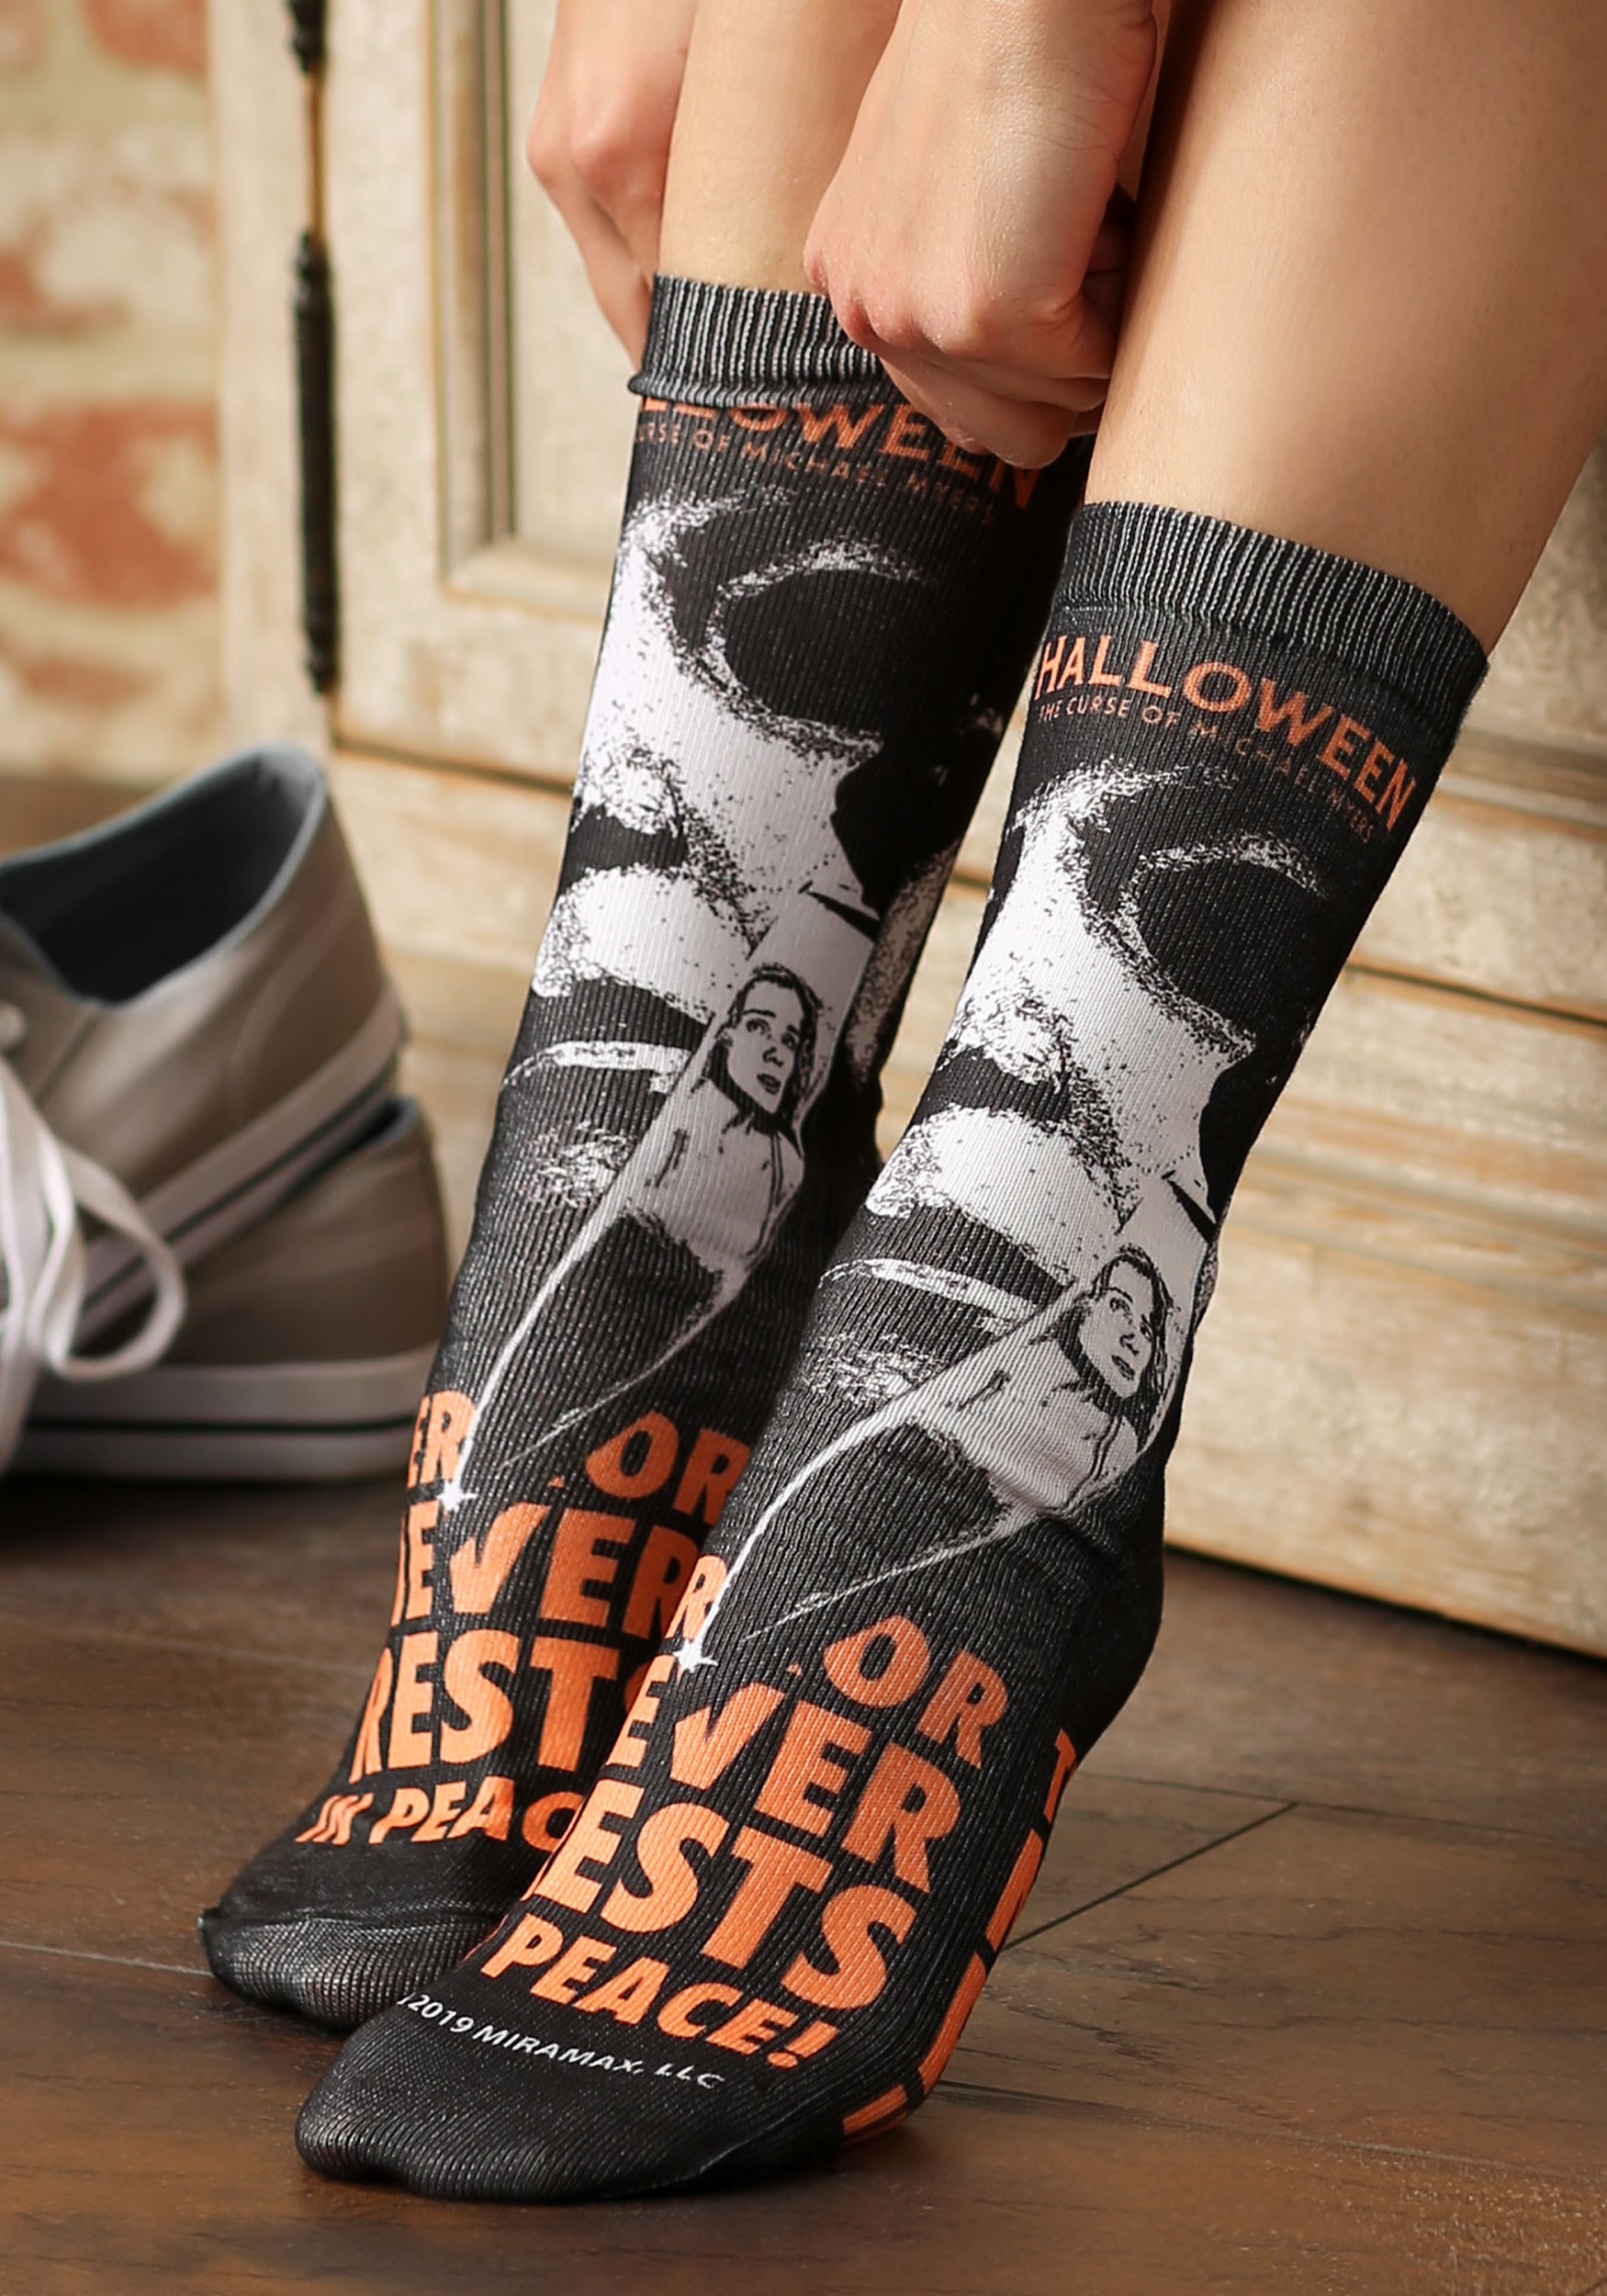 https://images.fun.com/products/63111/1-1/halloween-movie-poster-sublimated-socks-update.jpg